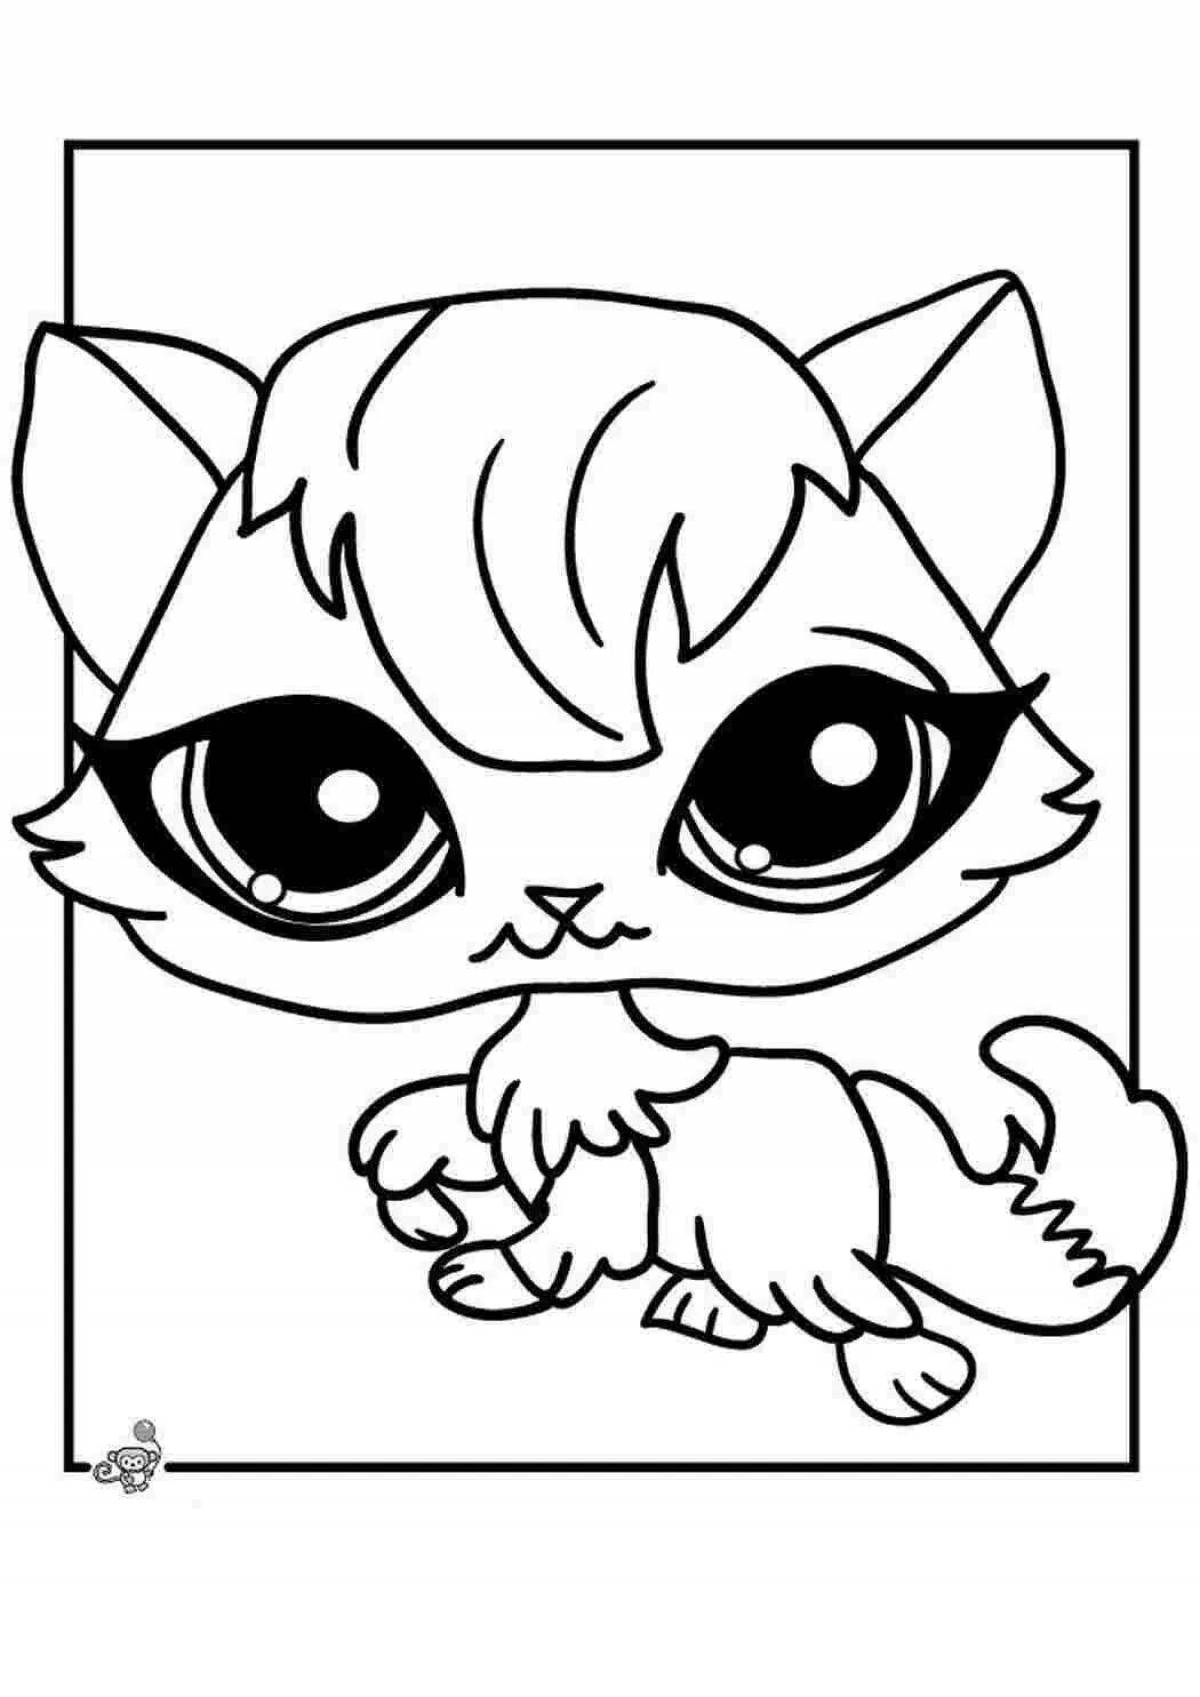 Cute cute cat coloring pages for girls